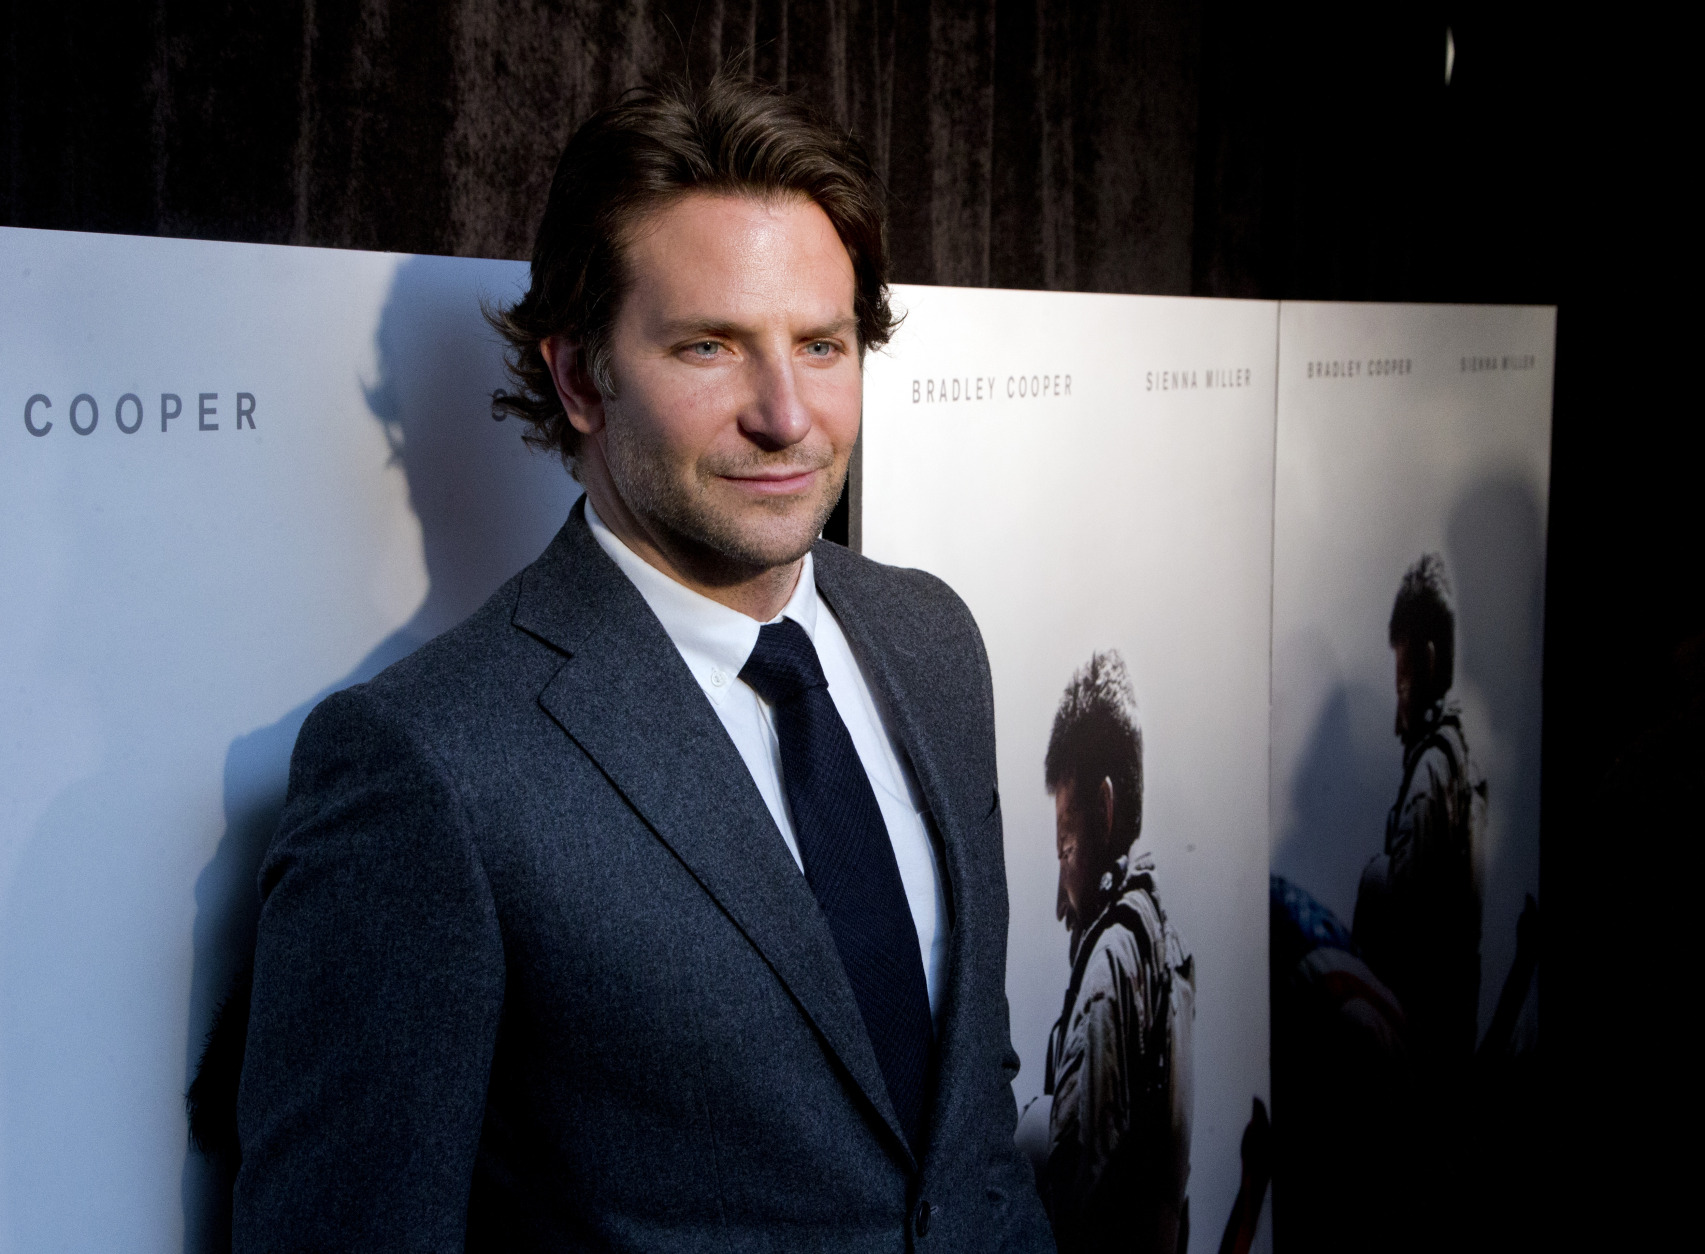 Actor Bradley Cooper arrive at the Washington premiere of the movie American Sniper at Burke Theatre at the U.S. Navy Memorial in Washington, Tuesday, Jan. 13, 2015. Cooper played US Navy SEAL Chris Kyle, the deadliest sniper in American military history and author of the book American Sniper," made into a movie with the same title.  (AP Photo/Manuel Balce Ceneta)